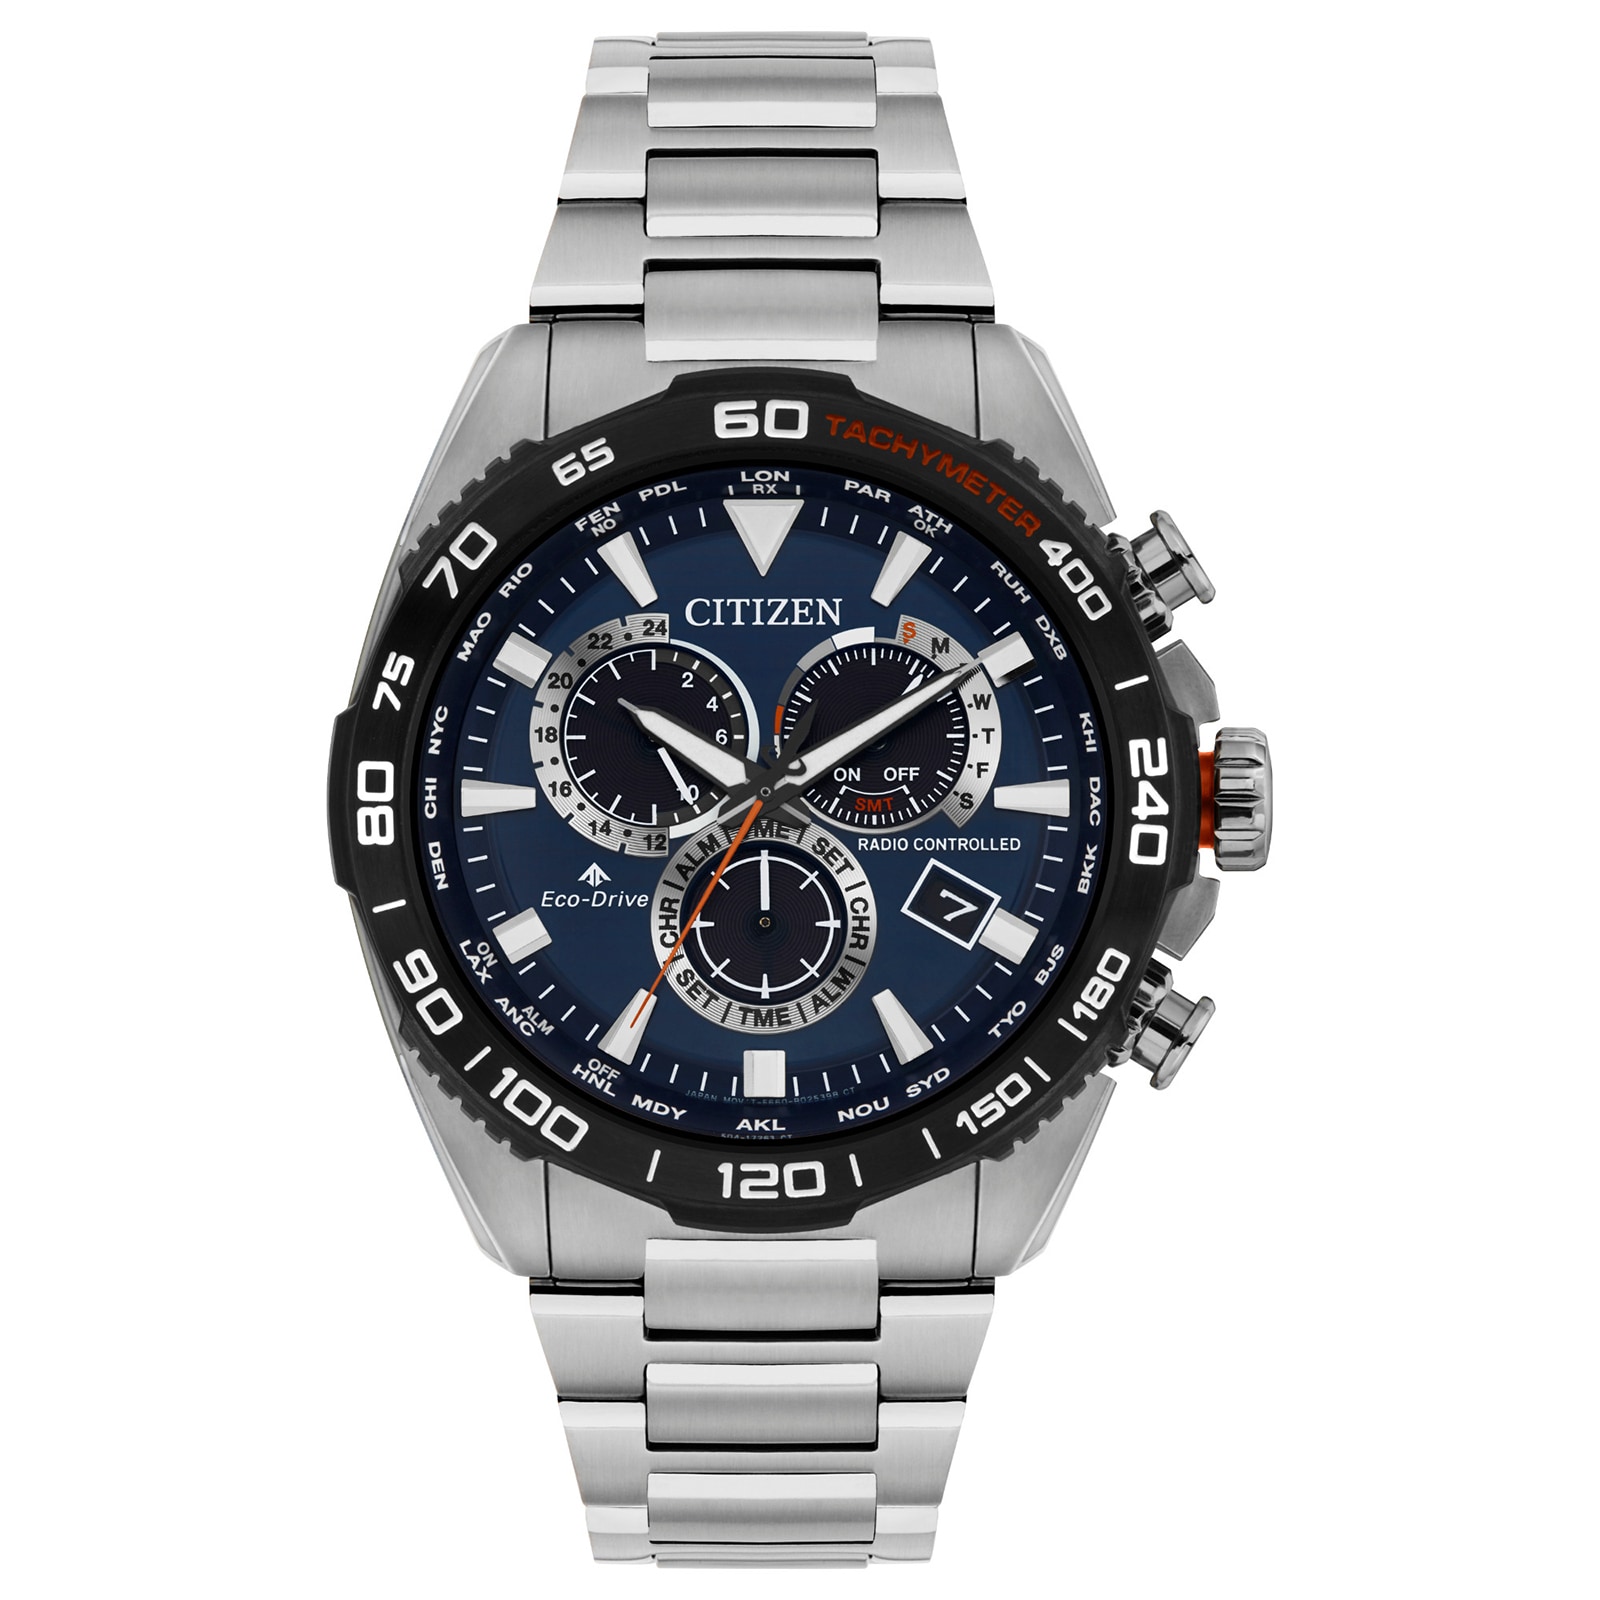 Promaster Diver Chronograph Mens Watch